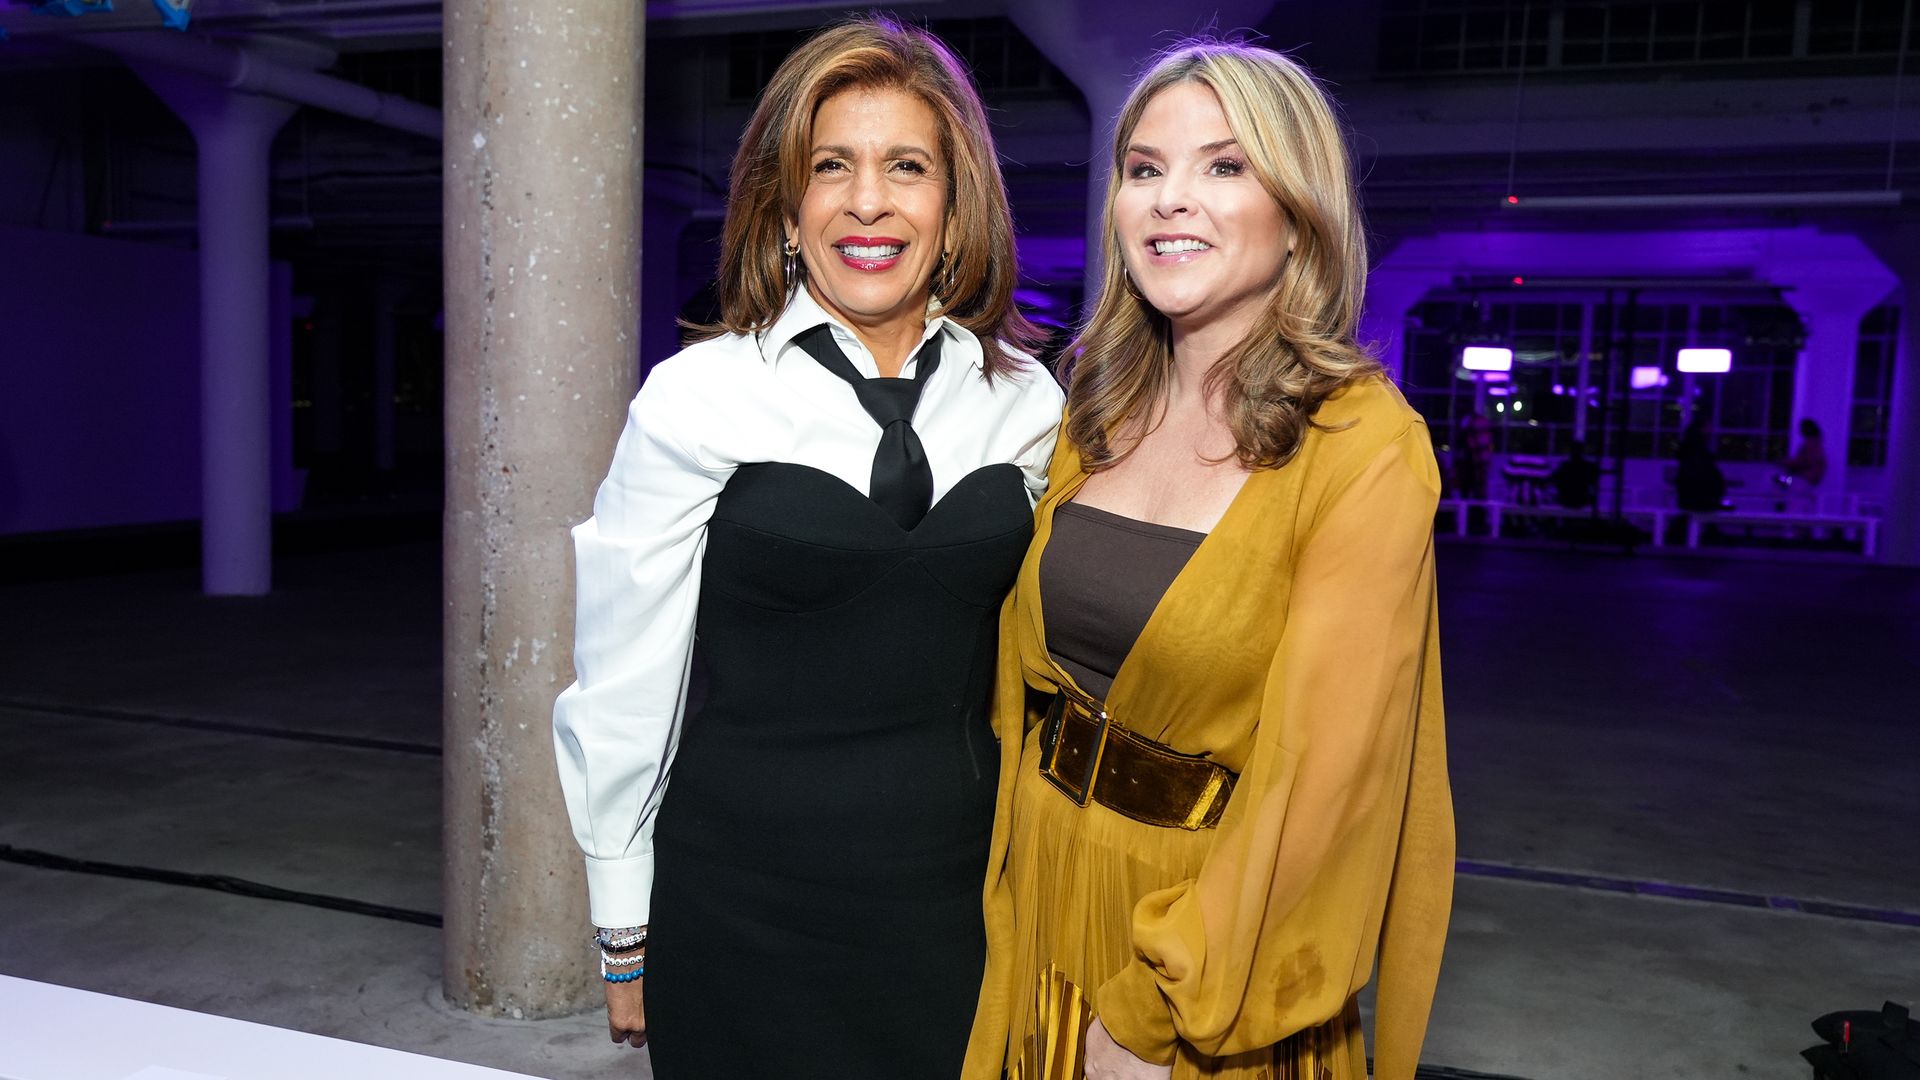 Hoda Kotb and Jenna Bush Hager reveal big news they've 'been waiting for' live on Today: 'Finally'